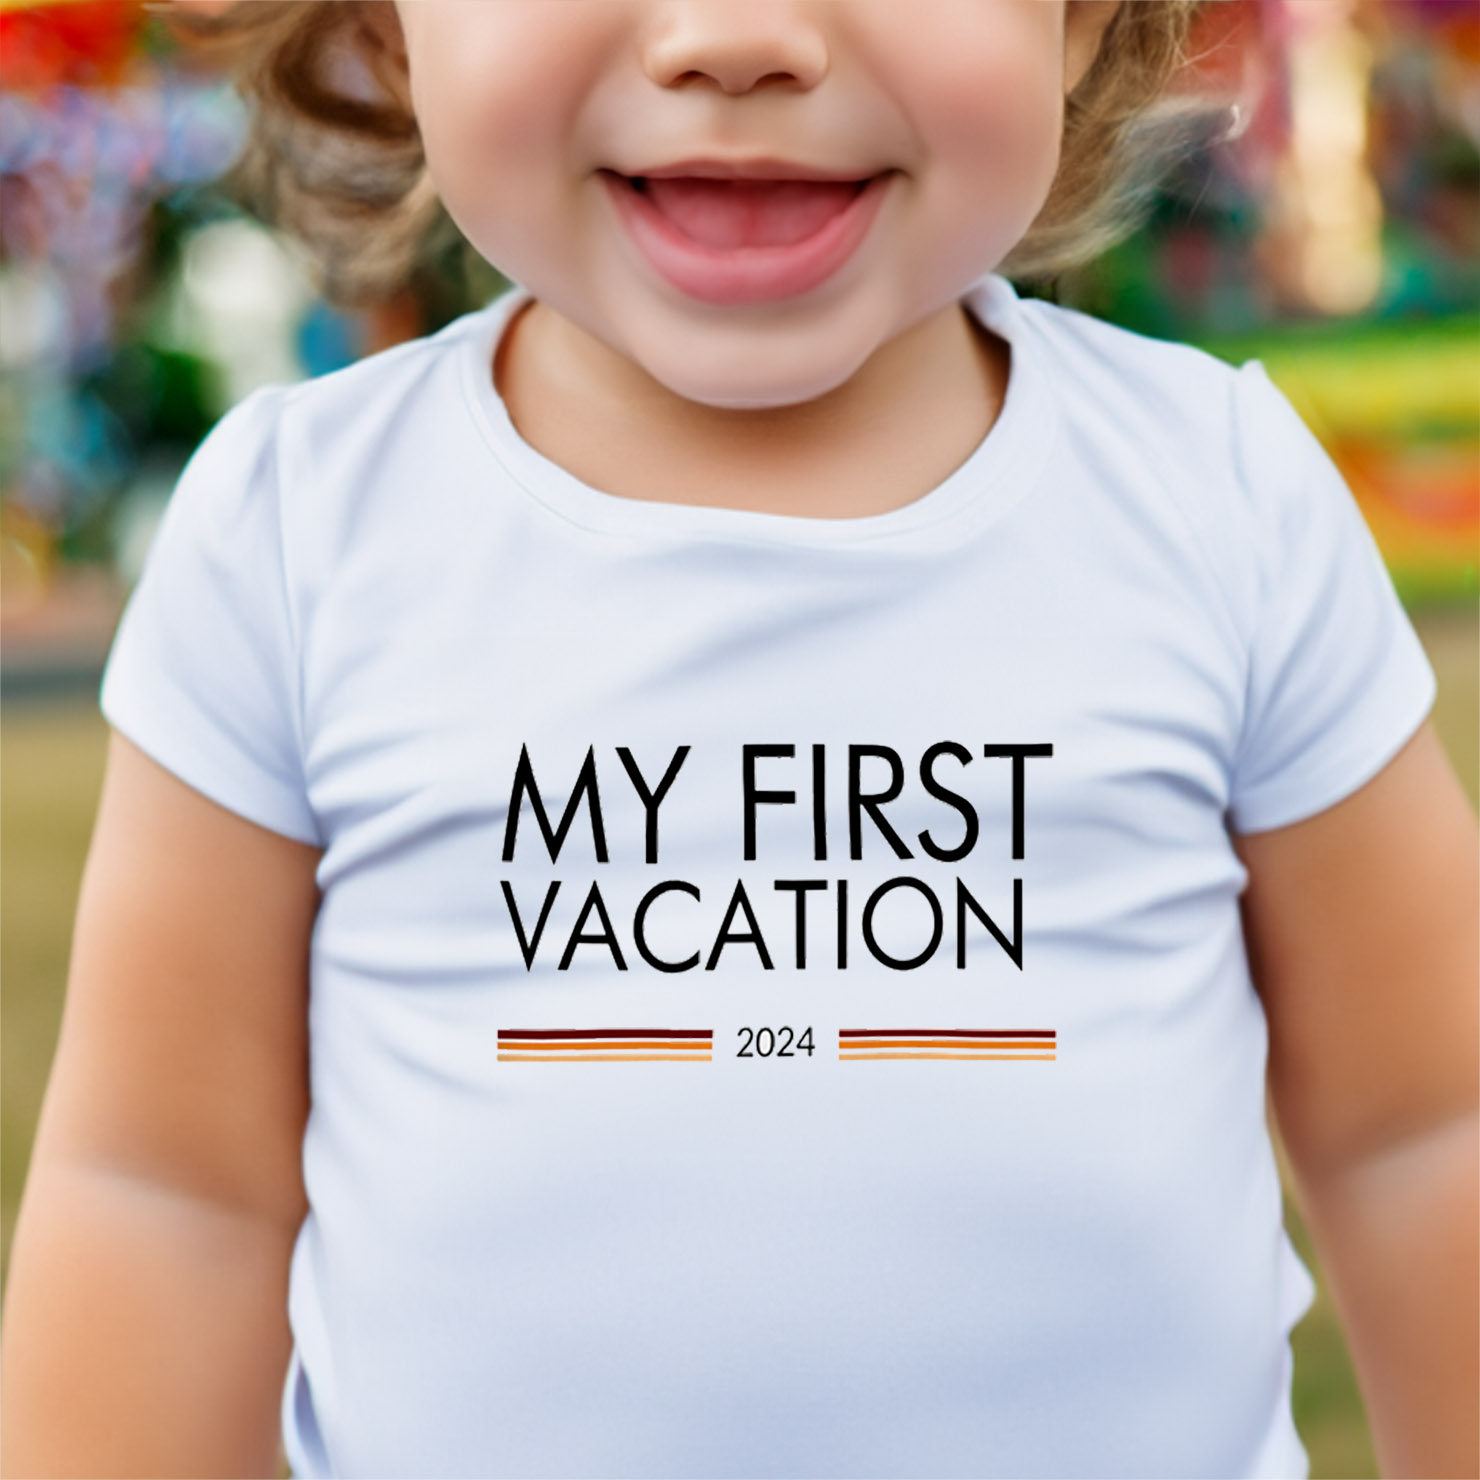 Creating Lasting Memories: How to Make Your Baby’s First Vacation Unforgettable